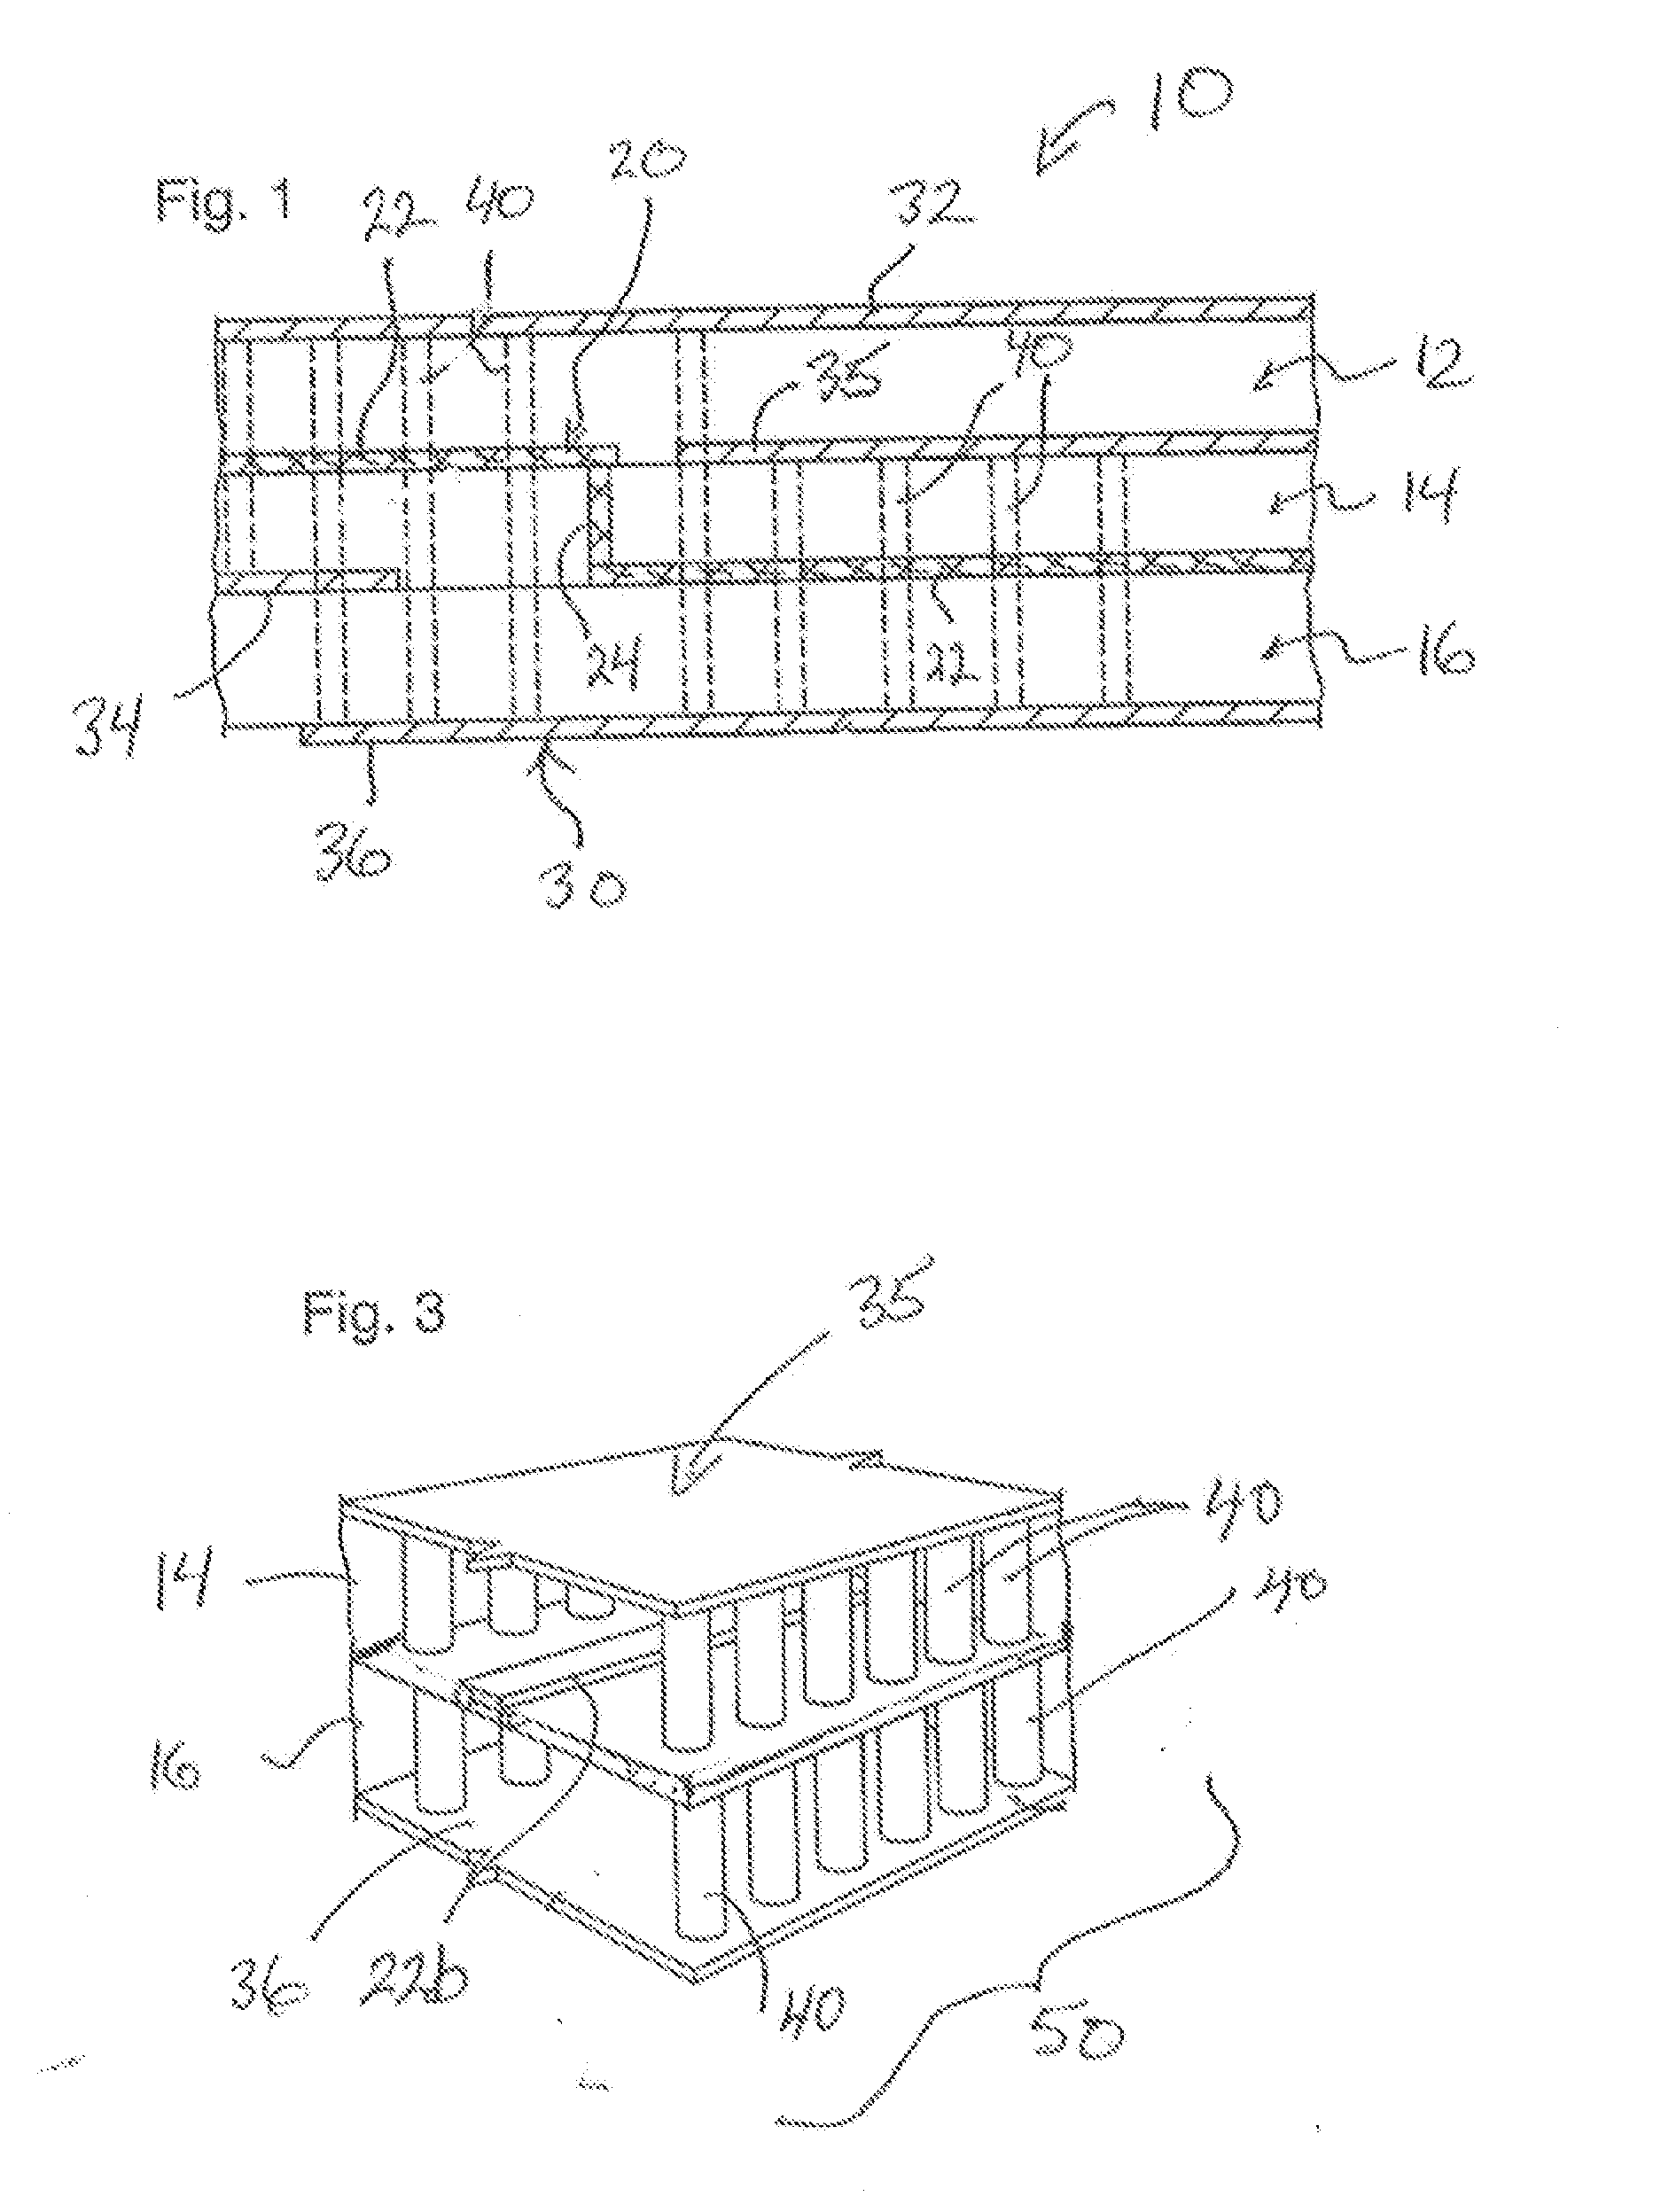 Shielded RF Transmission Lines in Low Temperature Co-fired Ceramic Constructs and Method of Making Same